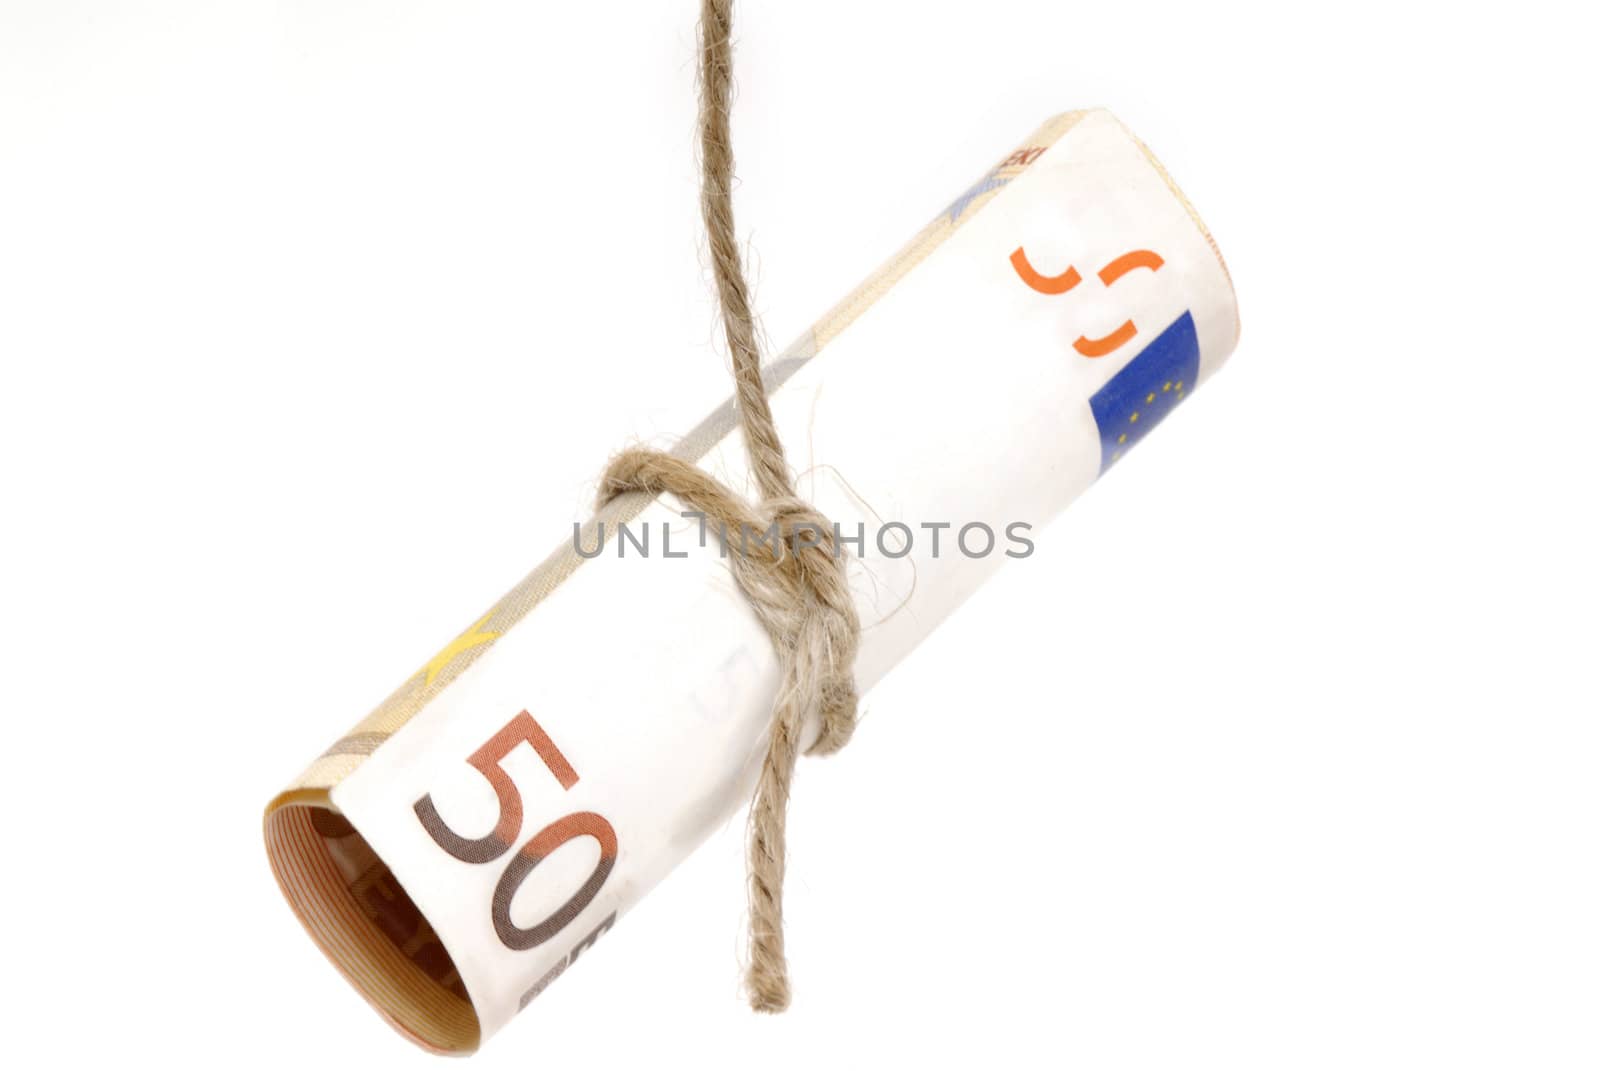  50 euro banknotes tied with a rope, isolated on white background 